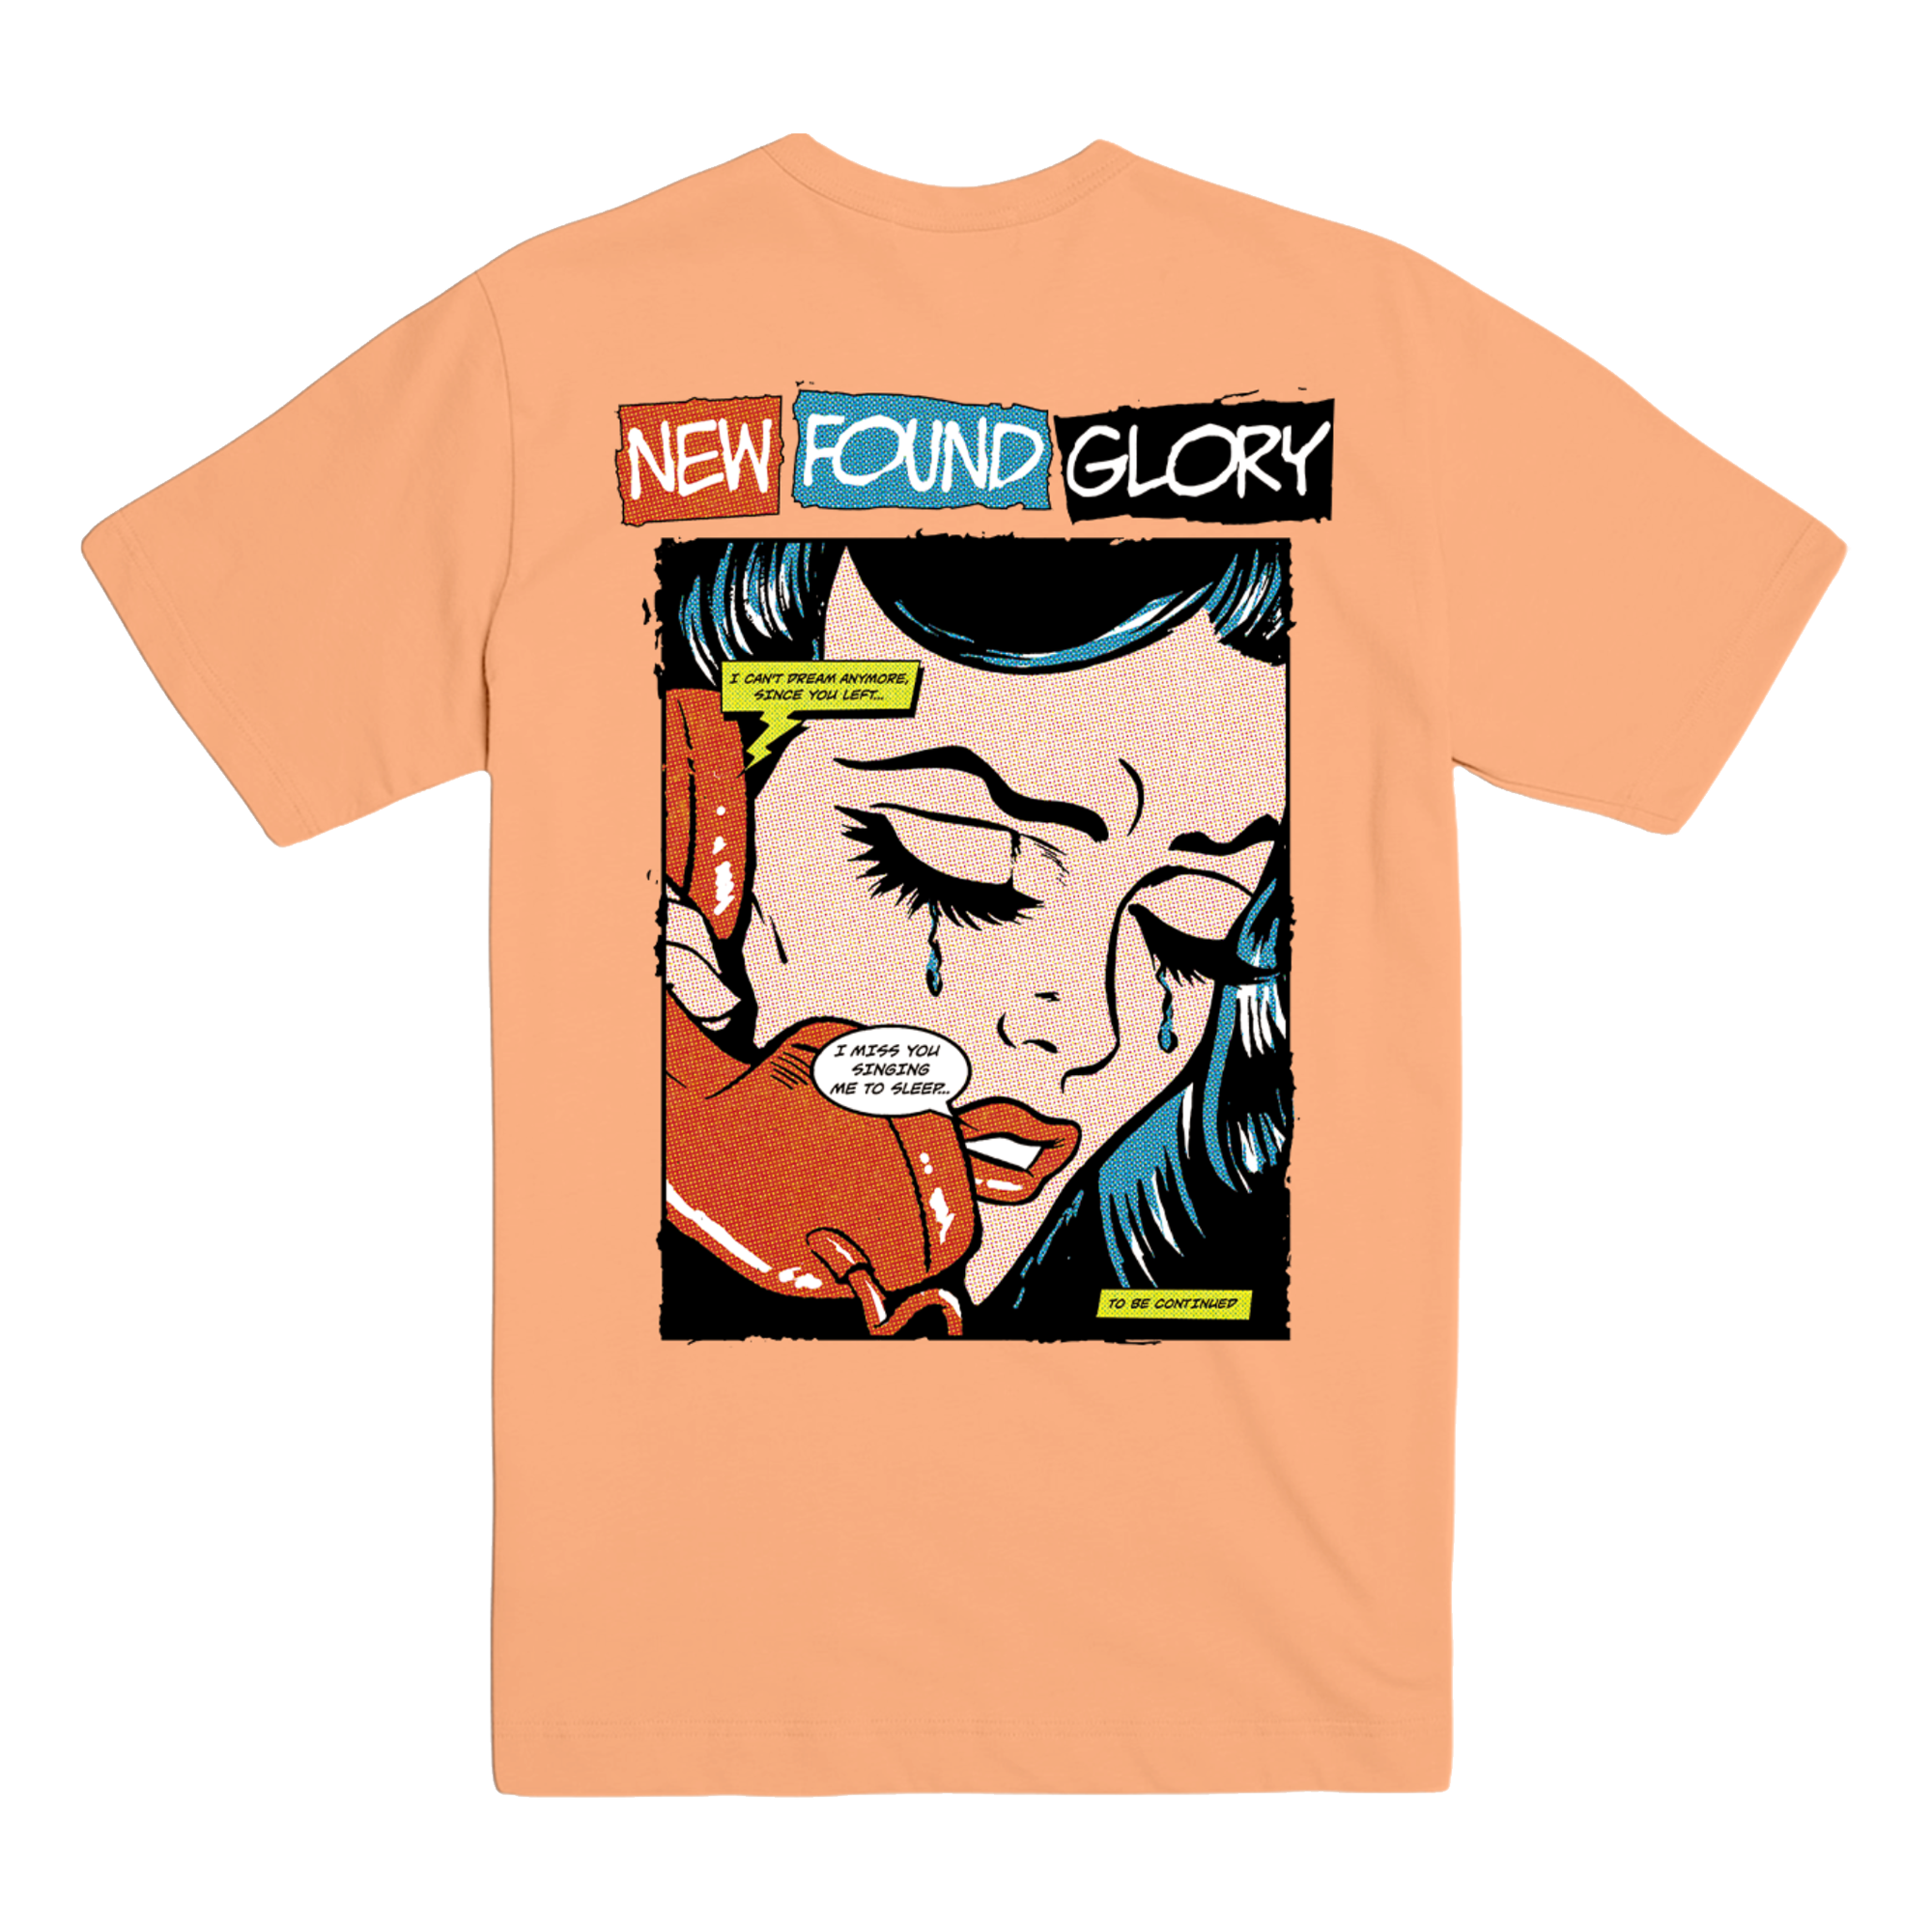 New Found Glory - Coral Self Titled Shirt